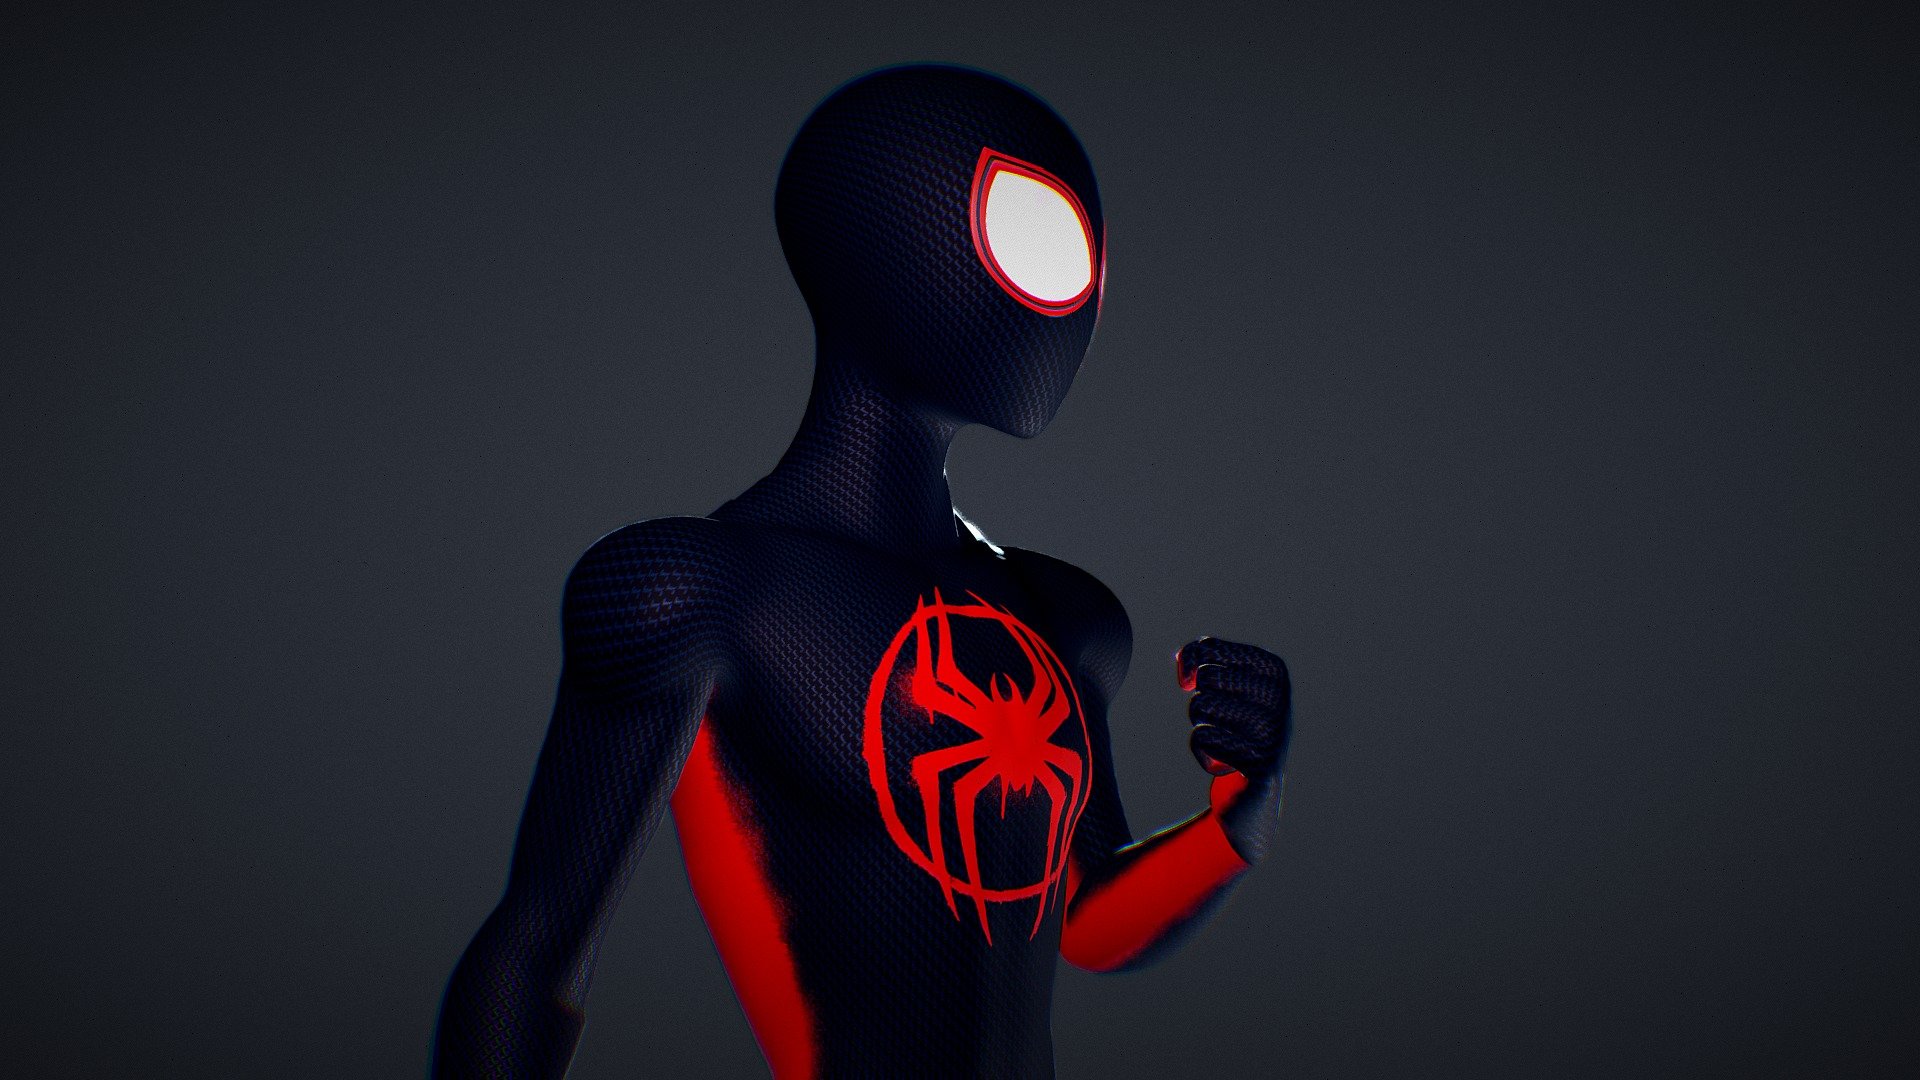 Welcome to my 3D model of Miles Morales, the iconic character from Spider-Man! Using Blender, I have dedicated time and energy to create a faithful representation of Miles, inspired by the film and his unique personality.

However, I also wanted to infuse my own personal touch into my work by adding elements of my artistic style, making the interpretation of Miles even more unique. I have emphasized specific details such as muscular definition and dynamic posing to enhance his character and energy.

I hope this model captures the attention of Spider-Man enthusiasts and 3D art lovers alike.

Thank you for your support and appreciation. If you have any questions or comments, feel free to share them!

**UPDATE: ** I have added the blend file, ensuring that the rig works properly 3d model